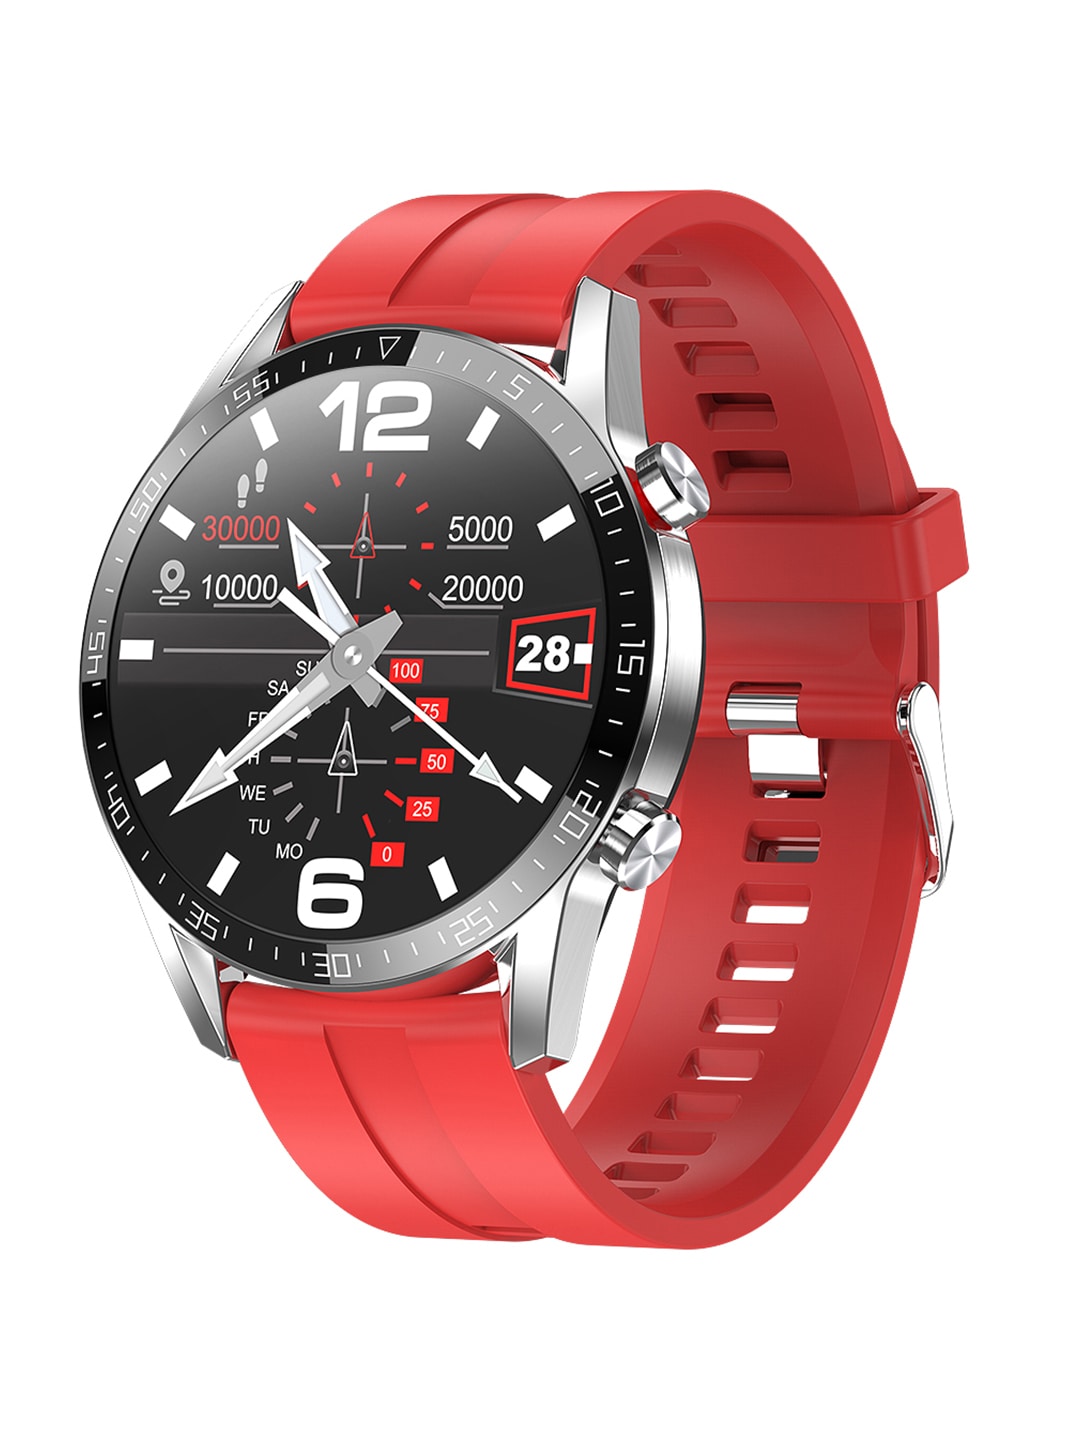 French Connection Red & Black Touch Screen Smartwatch with HRM & Smart Phone Notification - L19-G Price in India